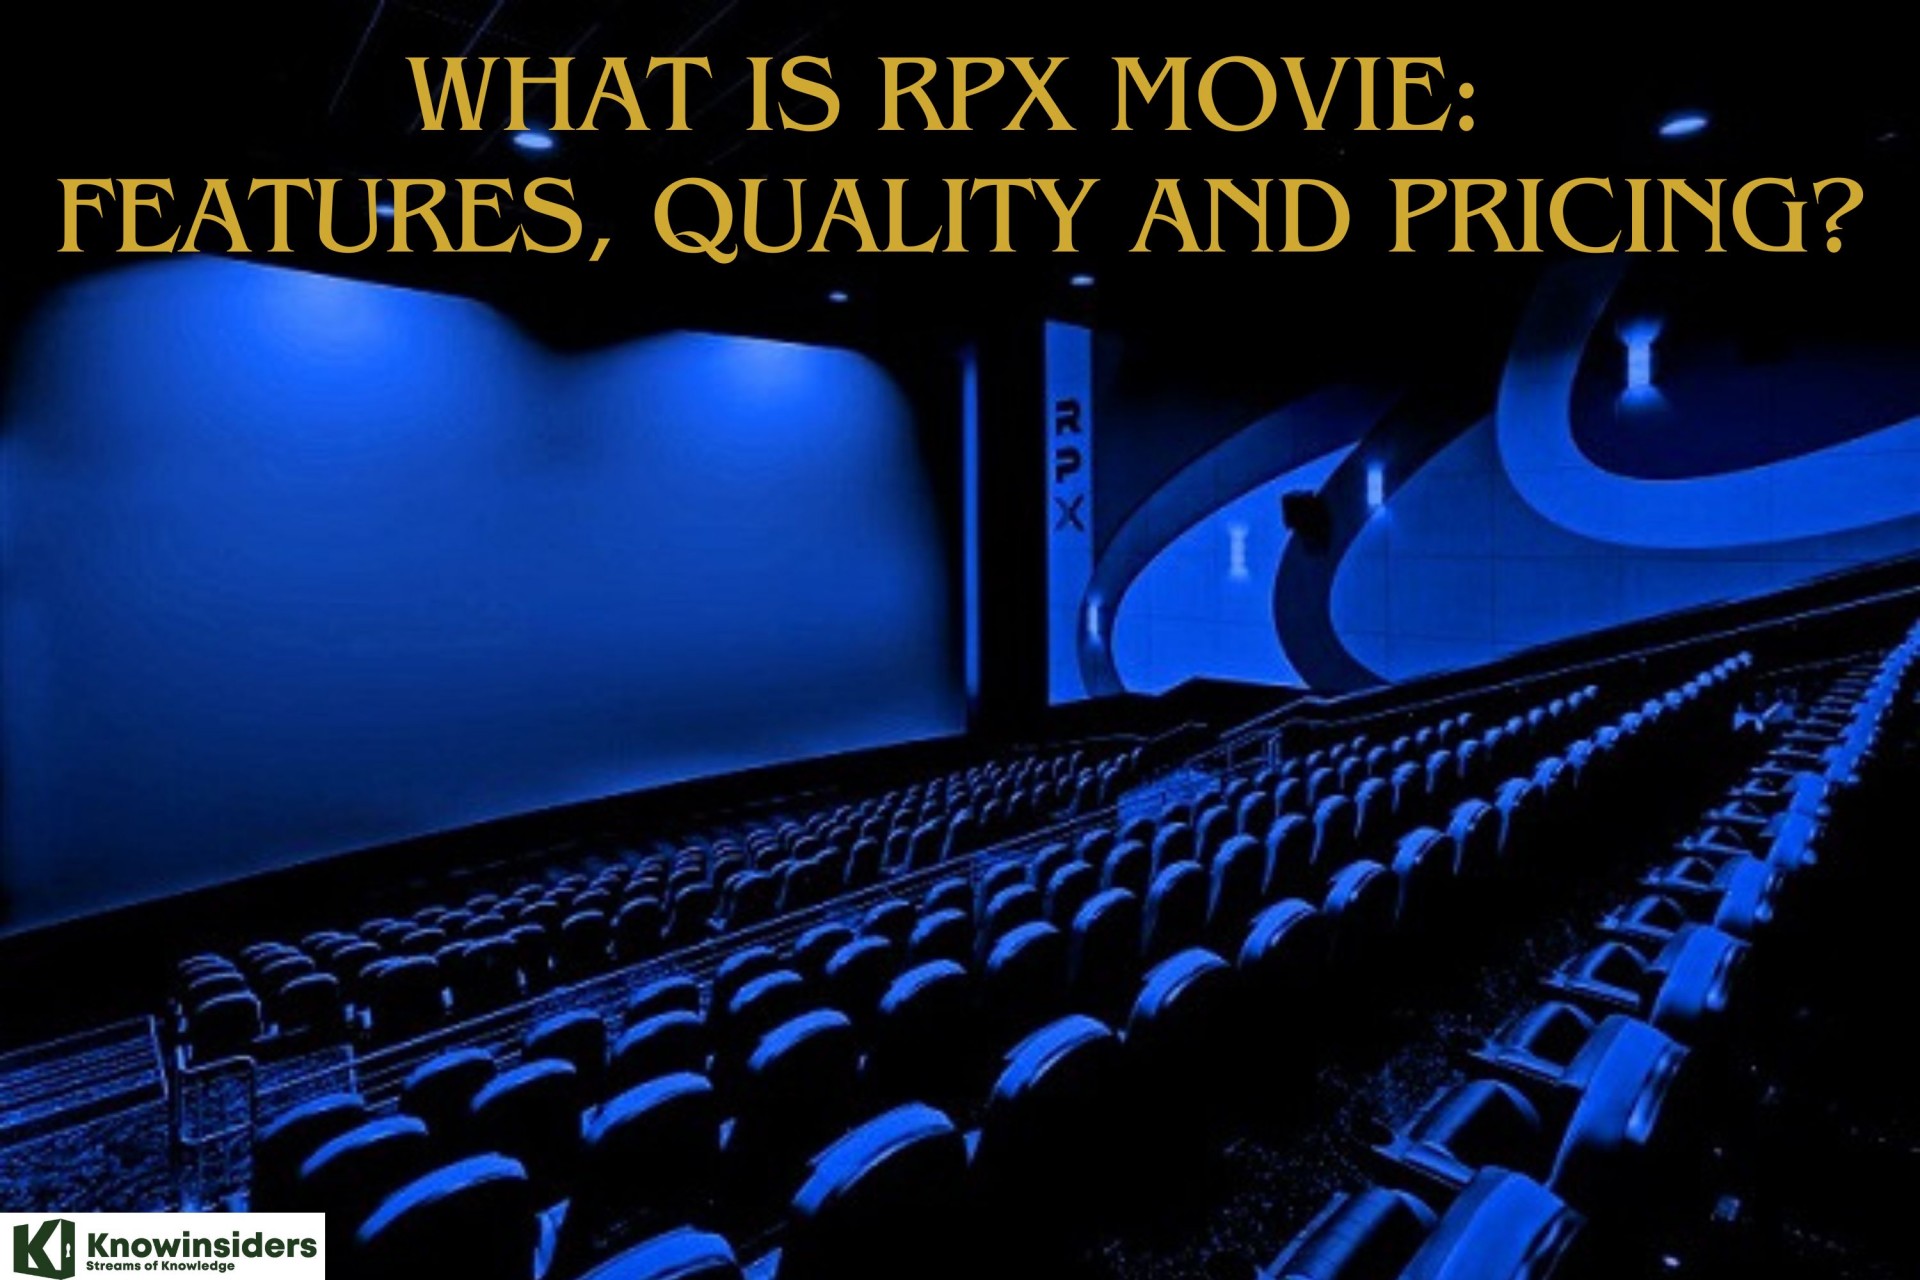 What Is RPX Movie: Features, Quality and Pricing?